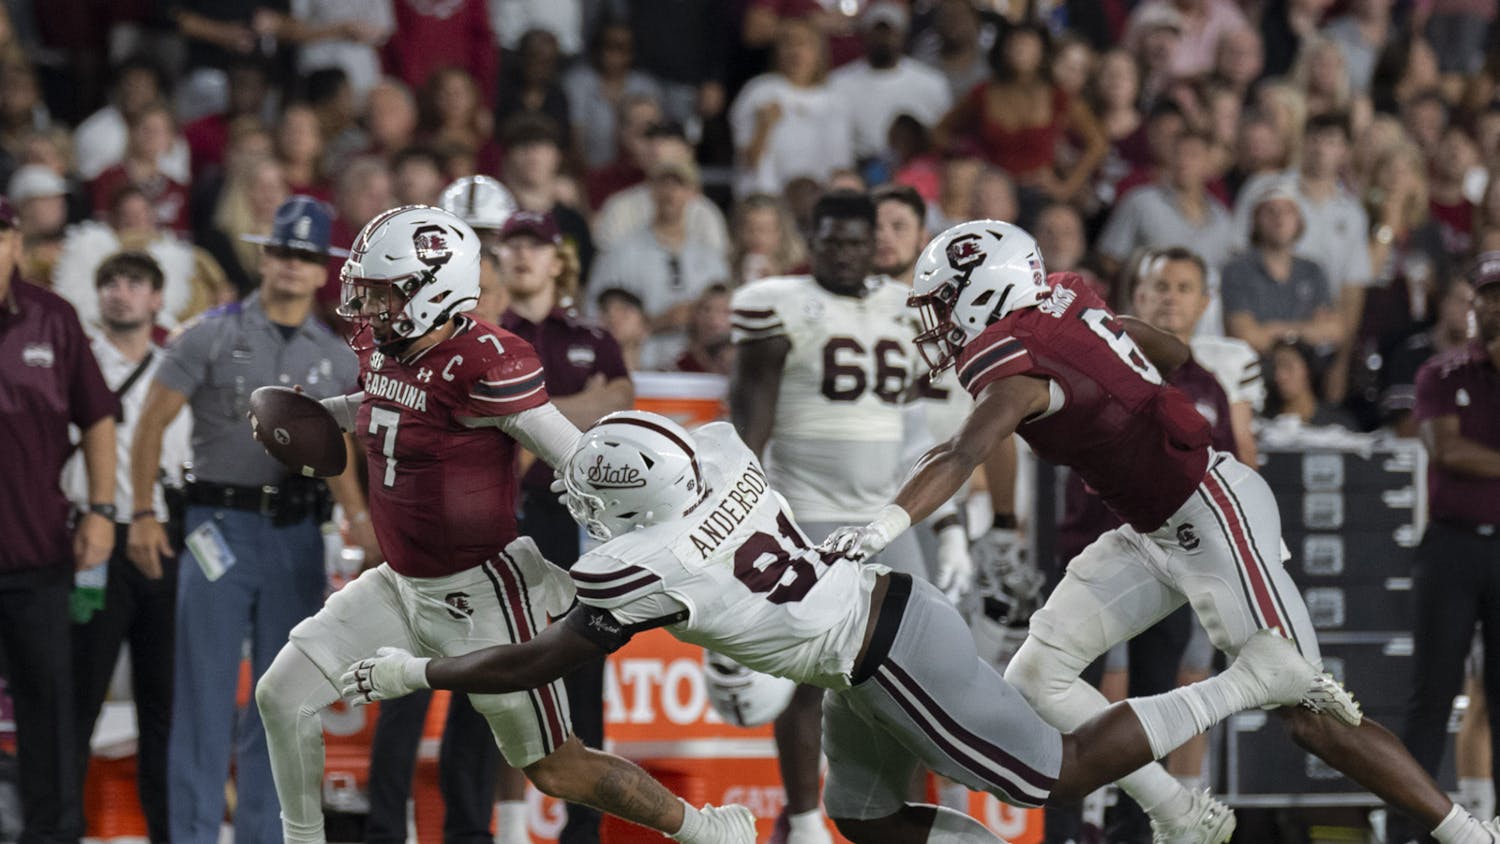 South Carolina defeated Mississippi State 37-30 Saturday in a back and forth game at Williams-Brice Stadium. This victory puts the Gamecocks at 2-2 for the season.